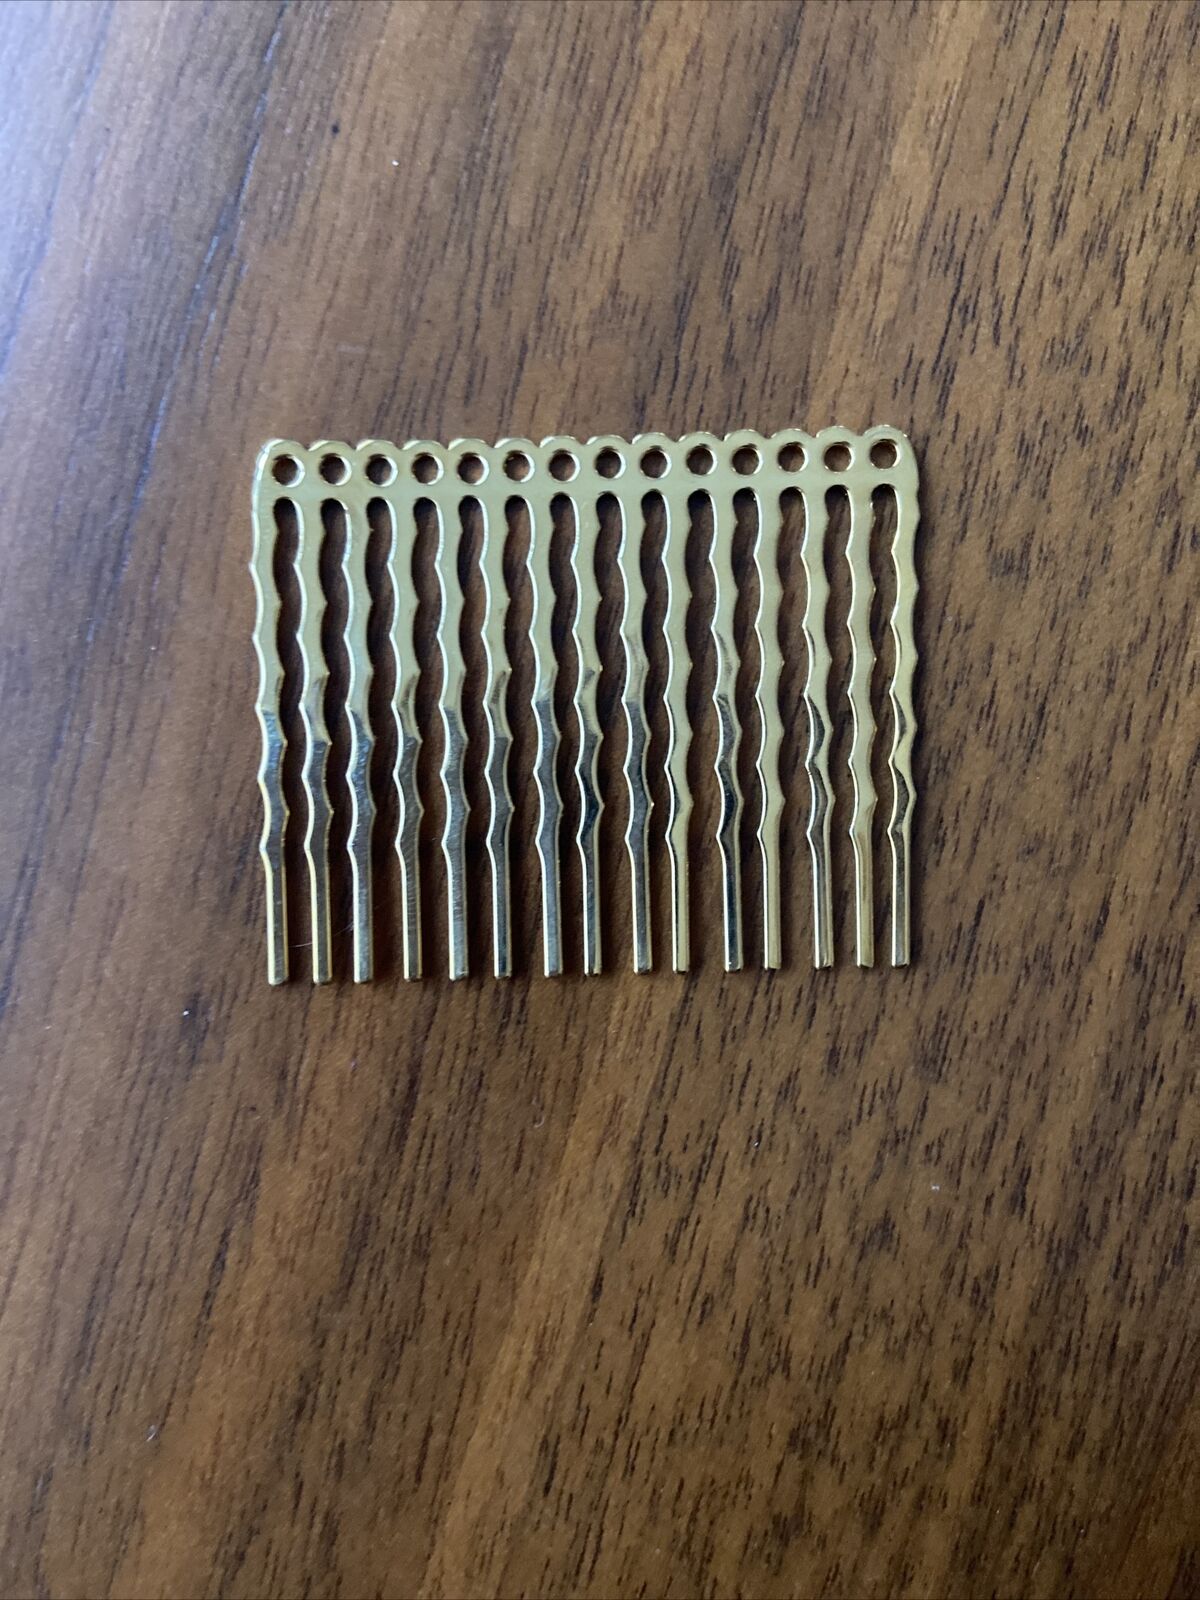 6 Gold Plated Hair Combs New 35mm X 42mm